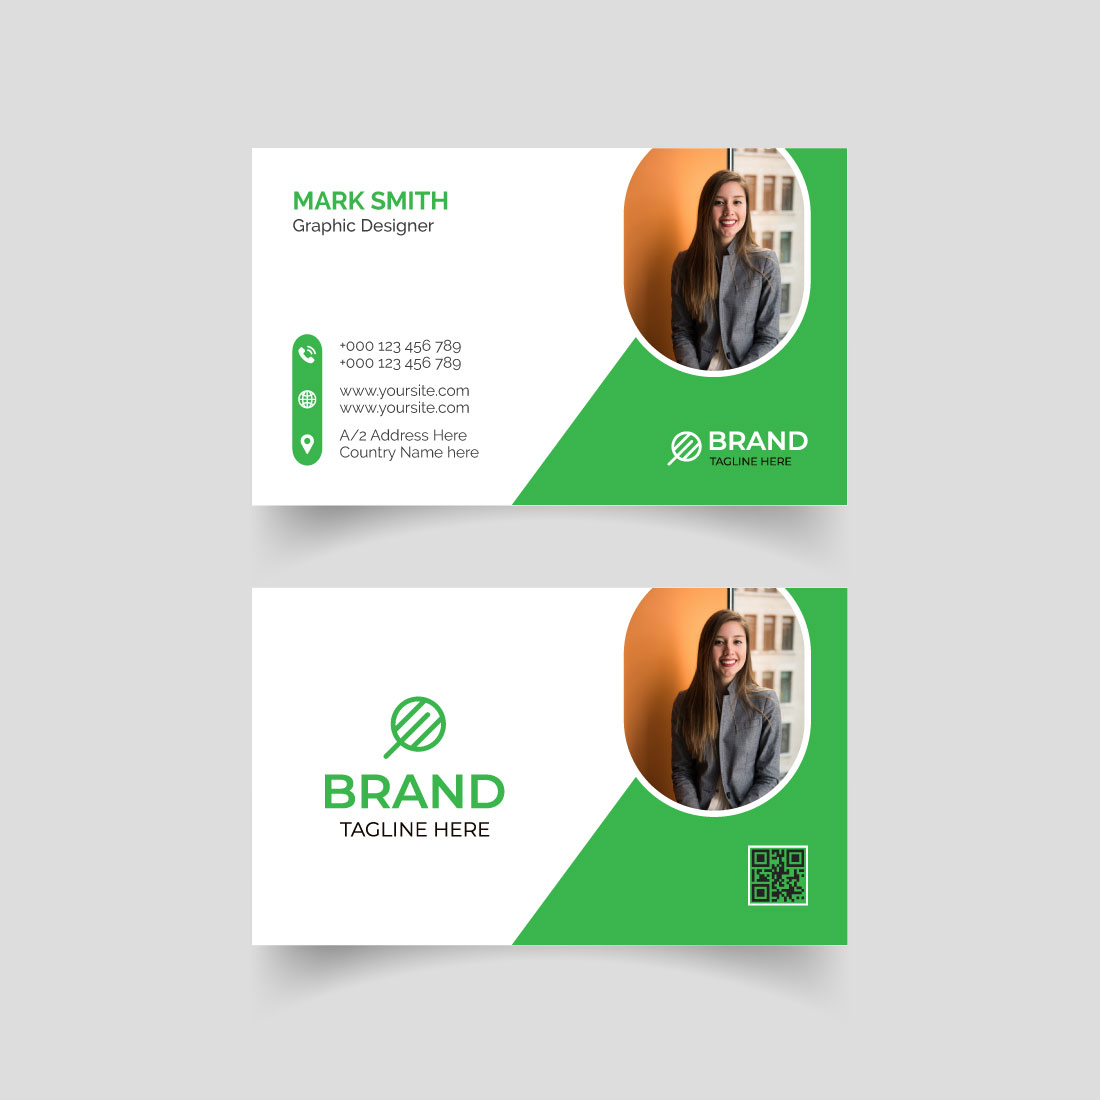 Creative Business Card Design cover image.